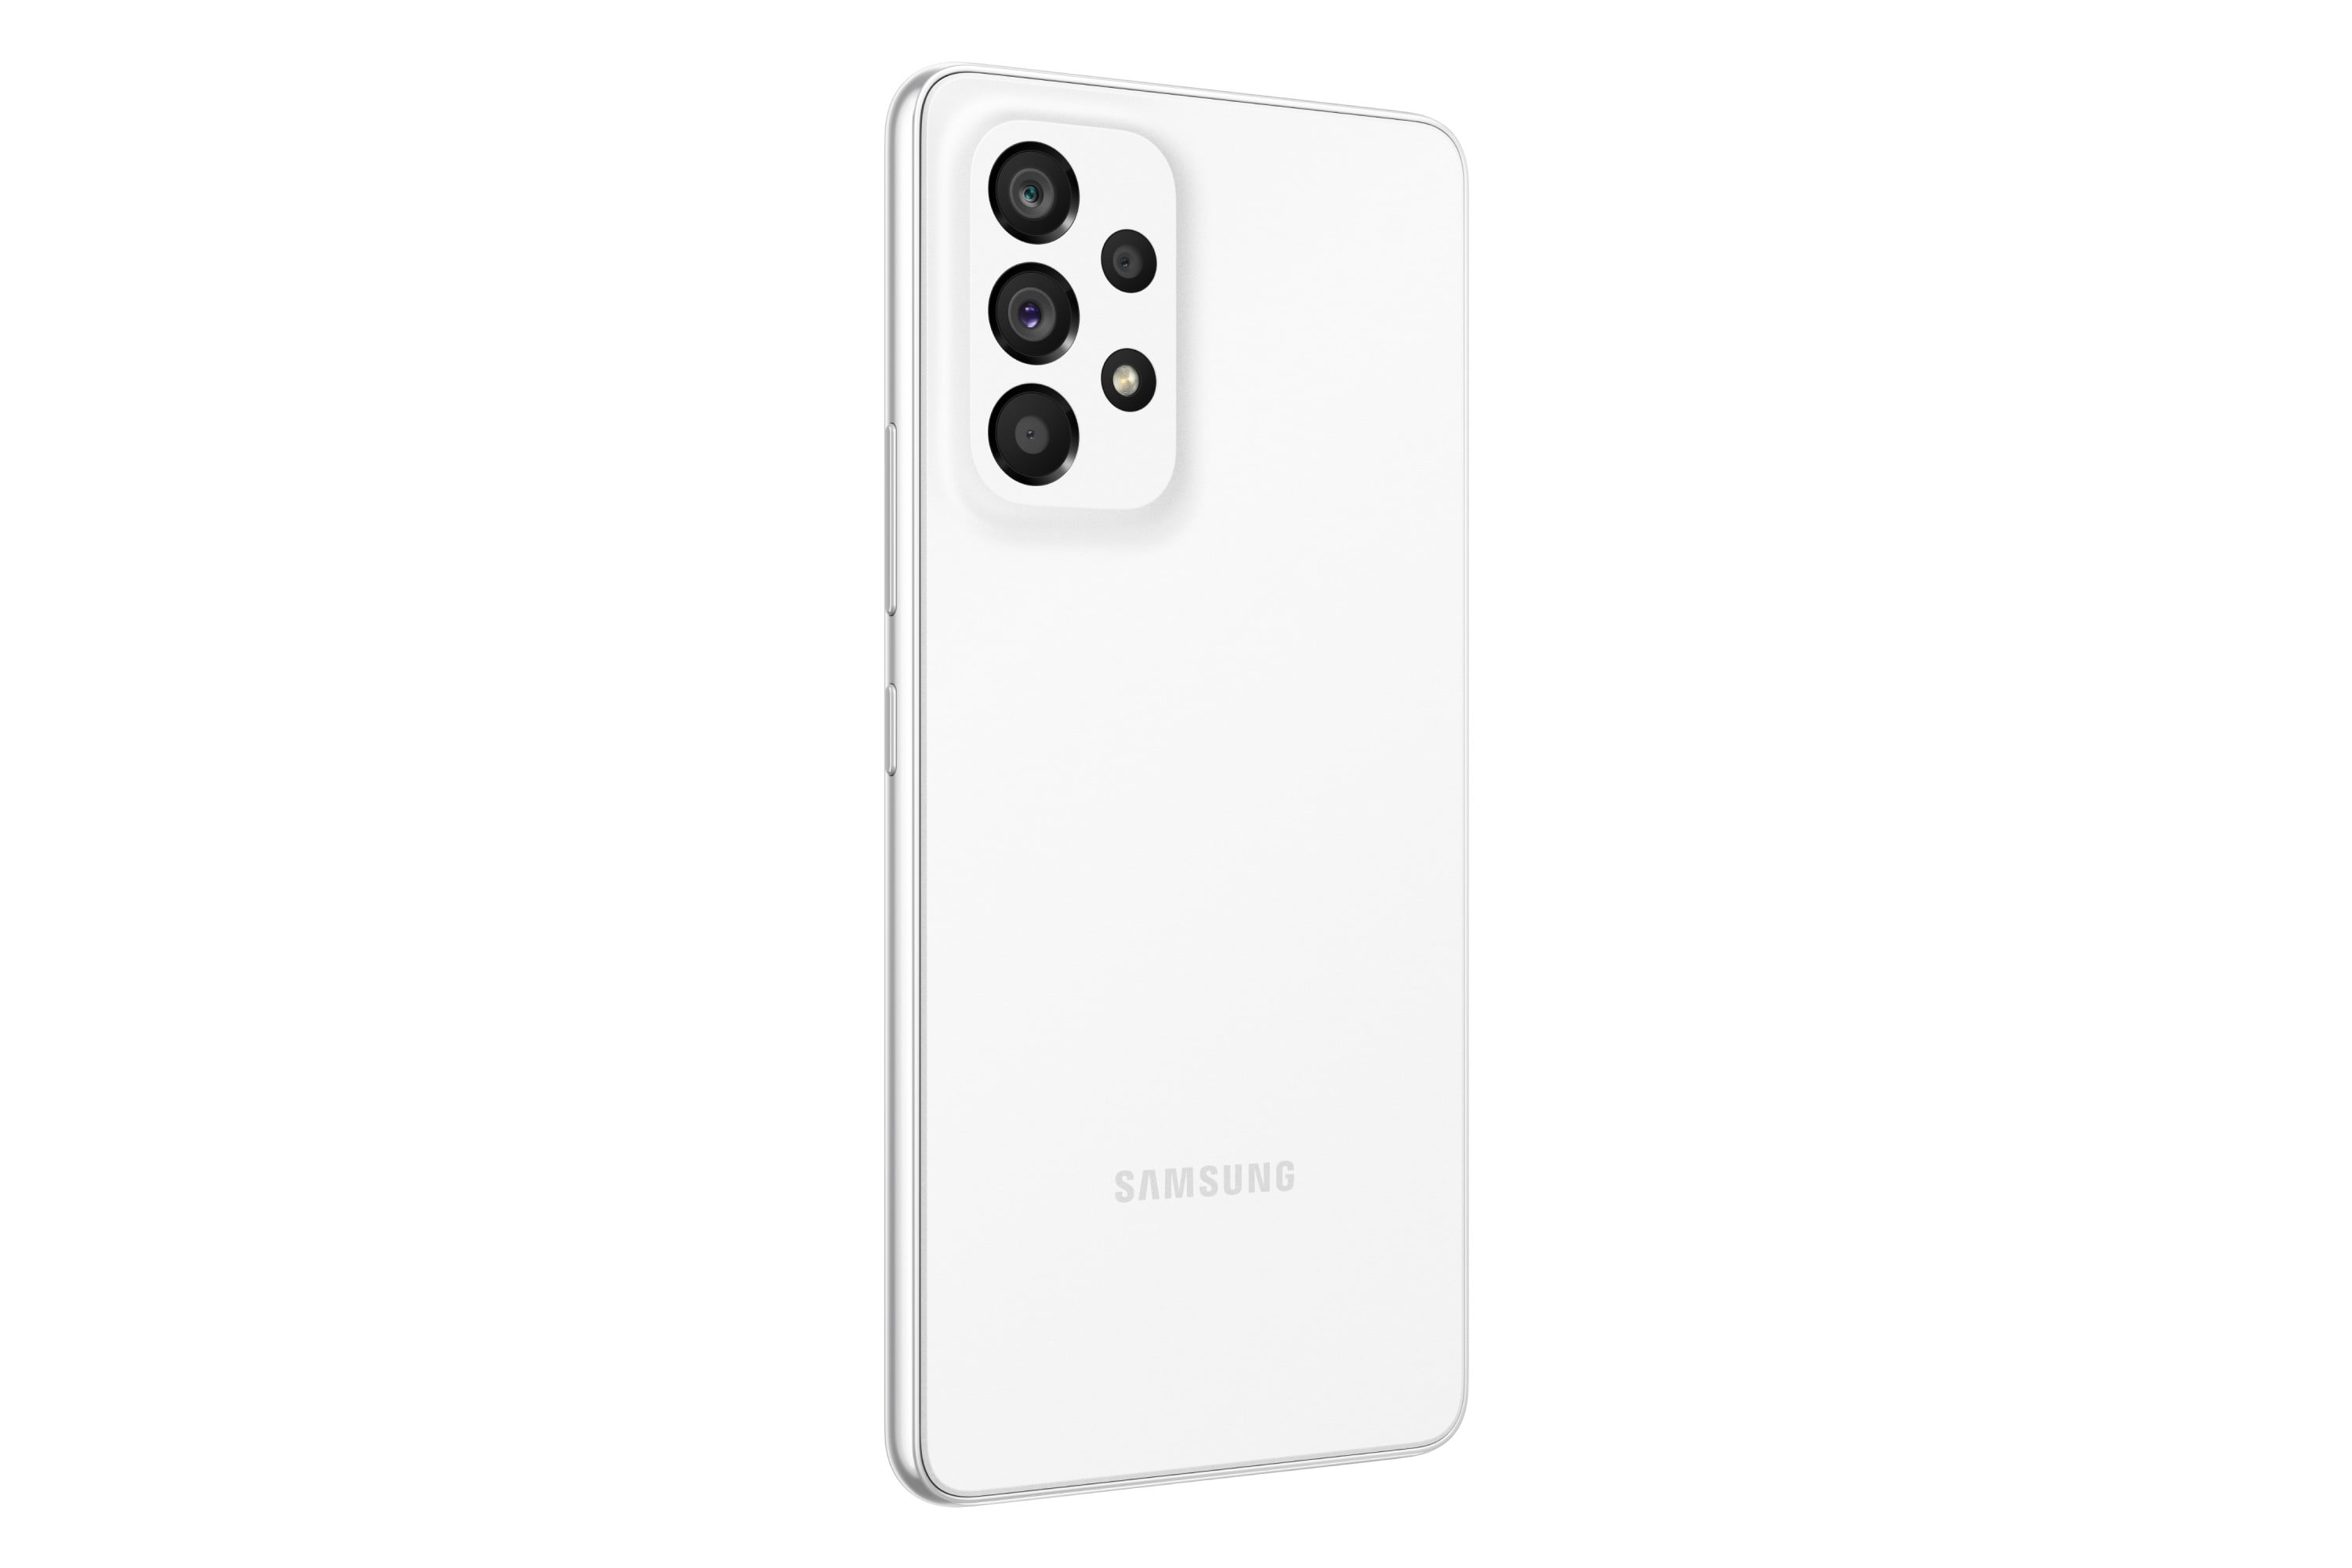 Huisdieren Jood Profetie Samsung Galaxy A53 5G A536E 128GB Dual SIM GSM Unlocked Android Smartphone  (Global, International Variant/US Compatible LTE) - Awesome White -  Walmart.com